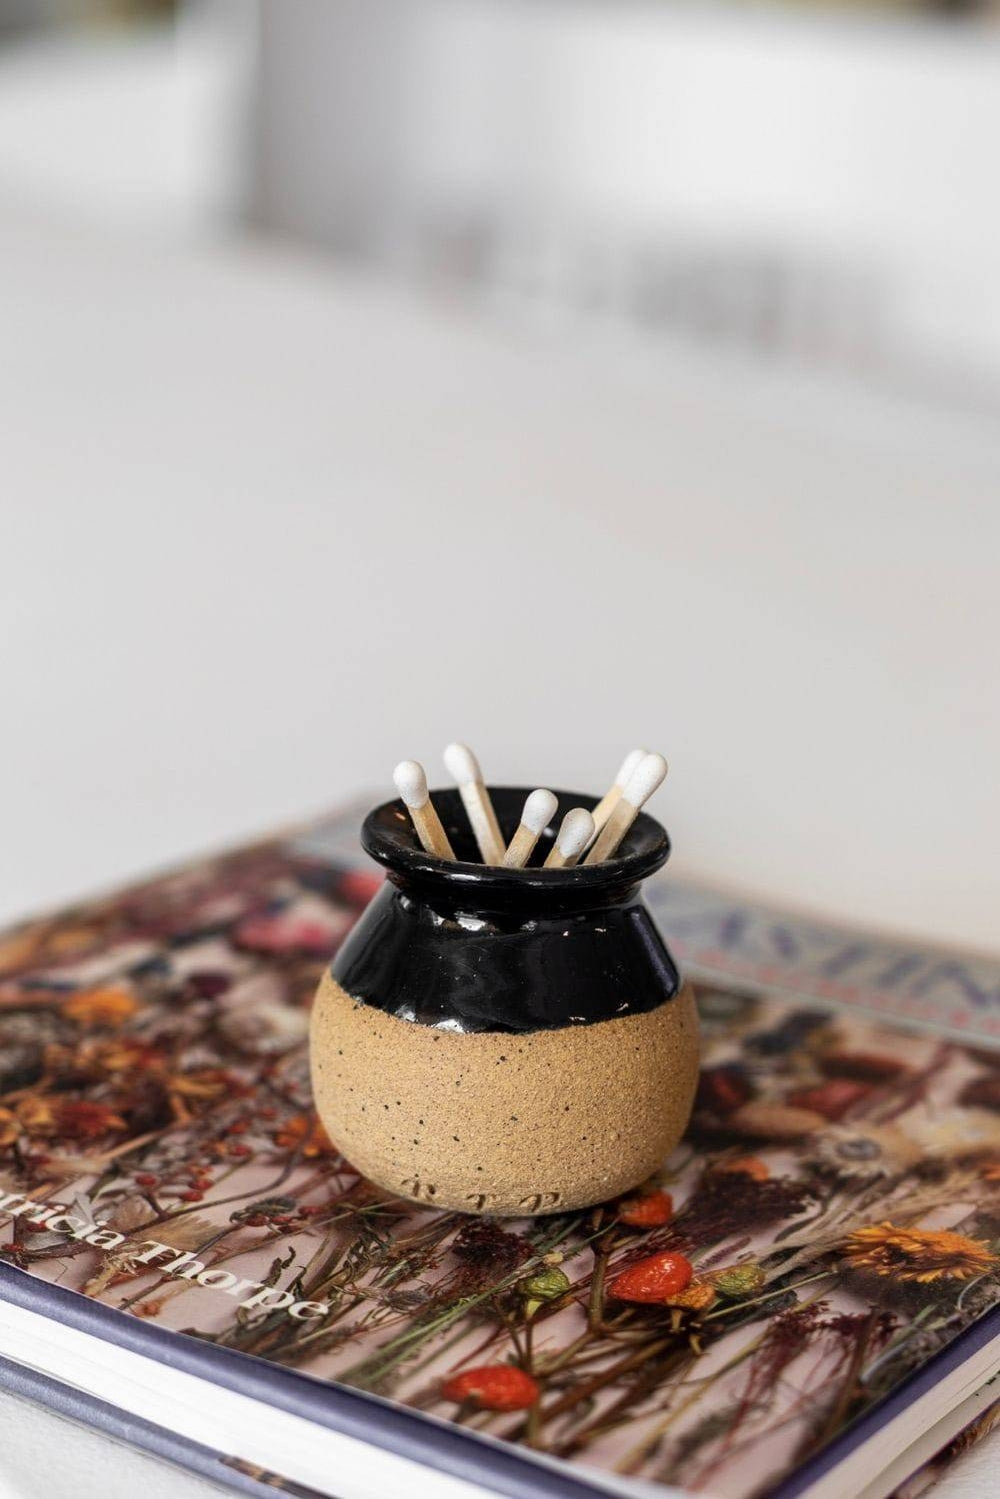 This sweet little two-toned match striker makes the perfect addition to your favorite incense or candle and adds a cute moment to any space in your home.